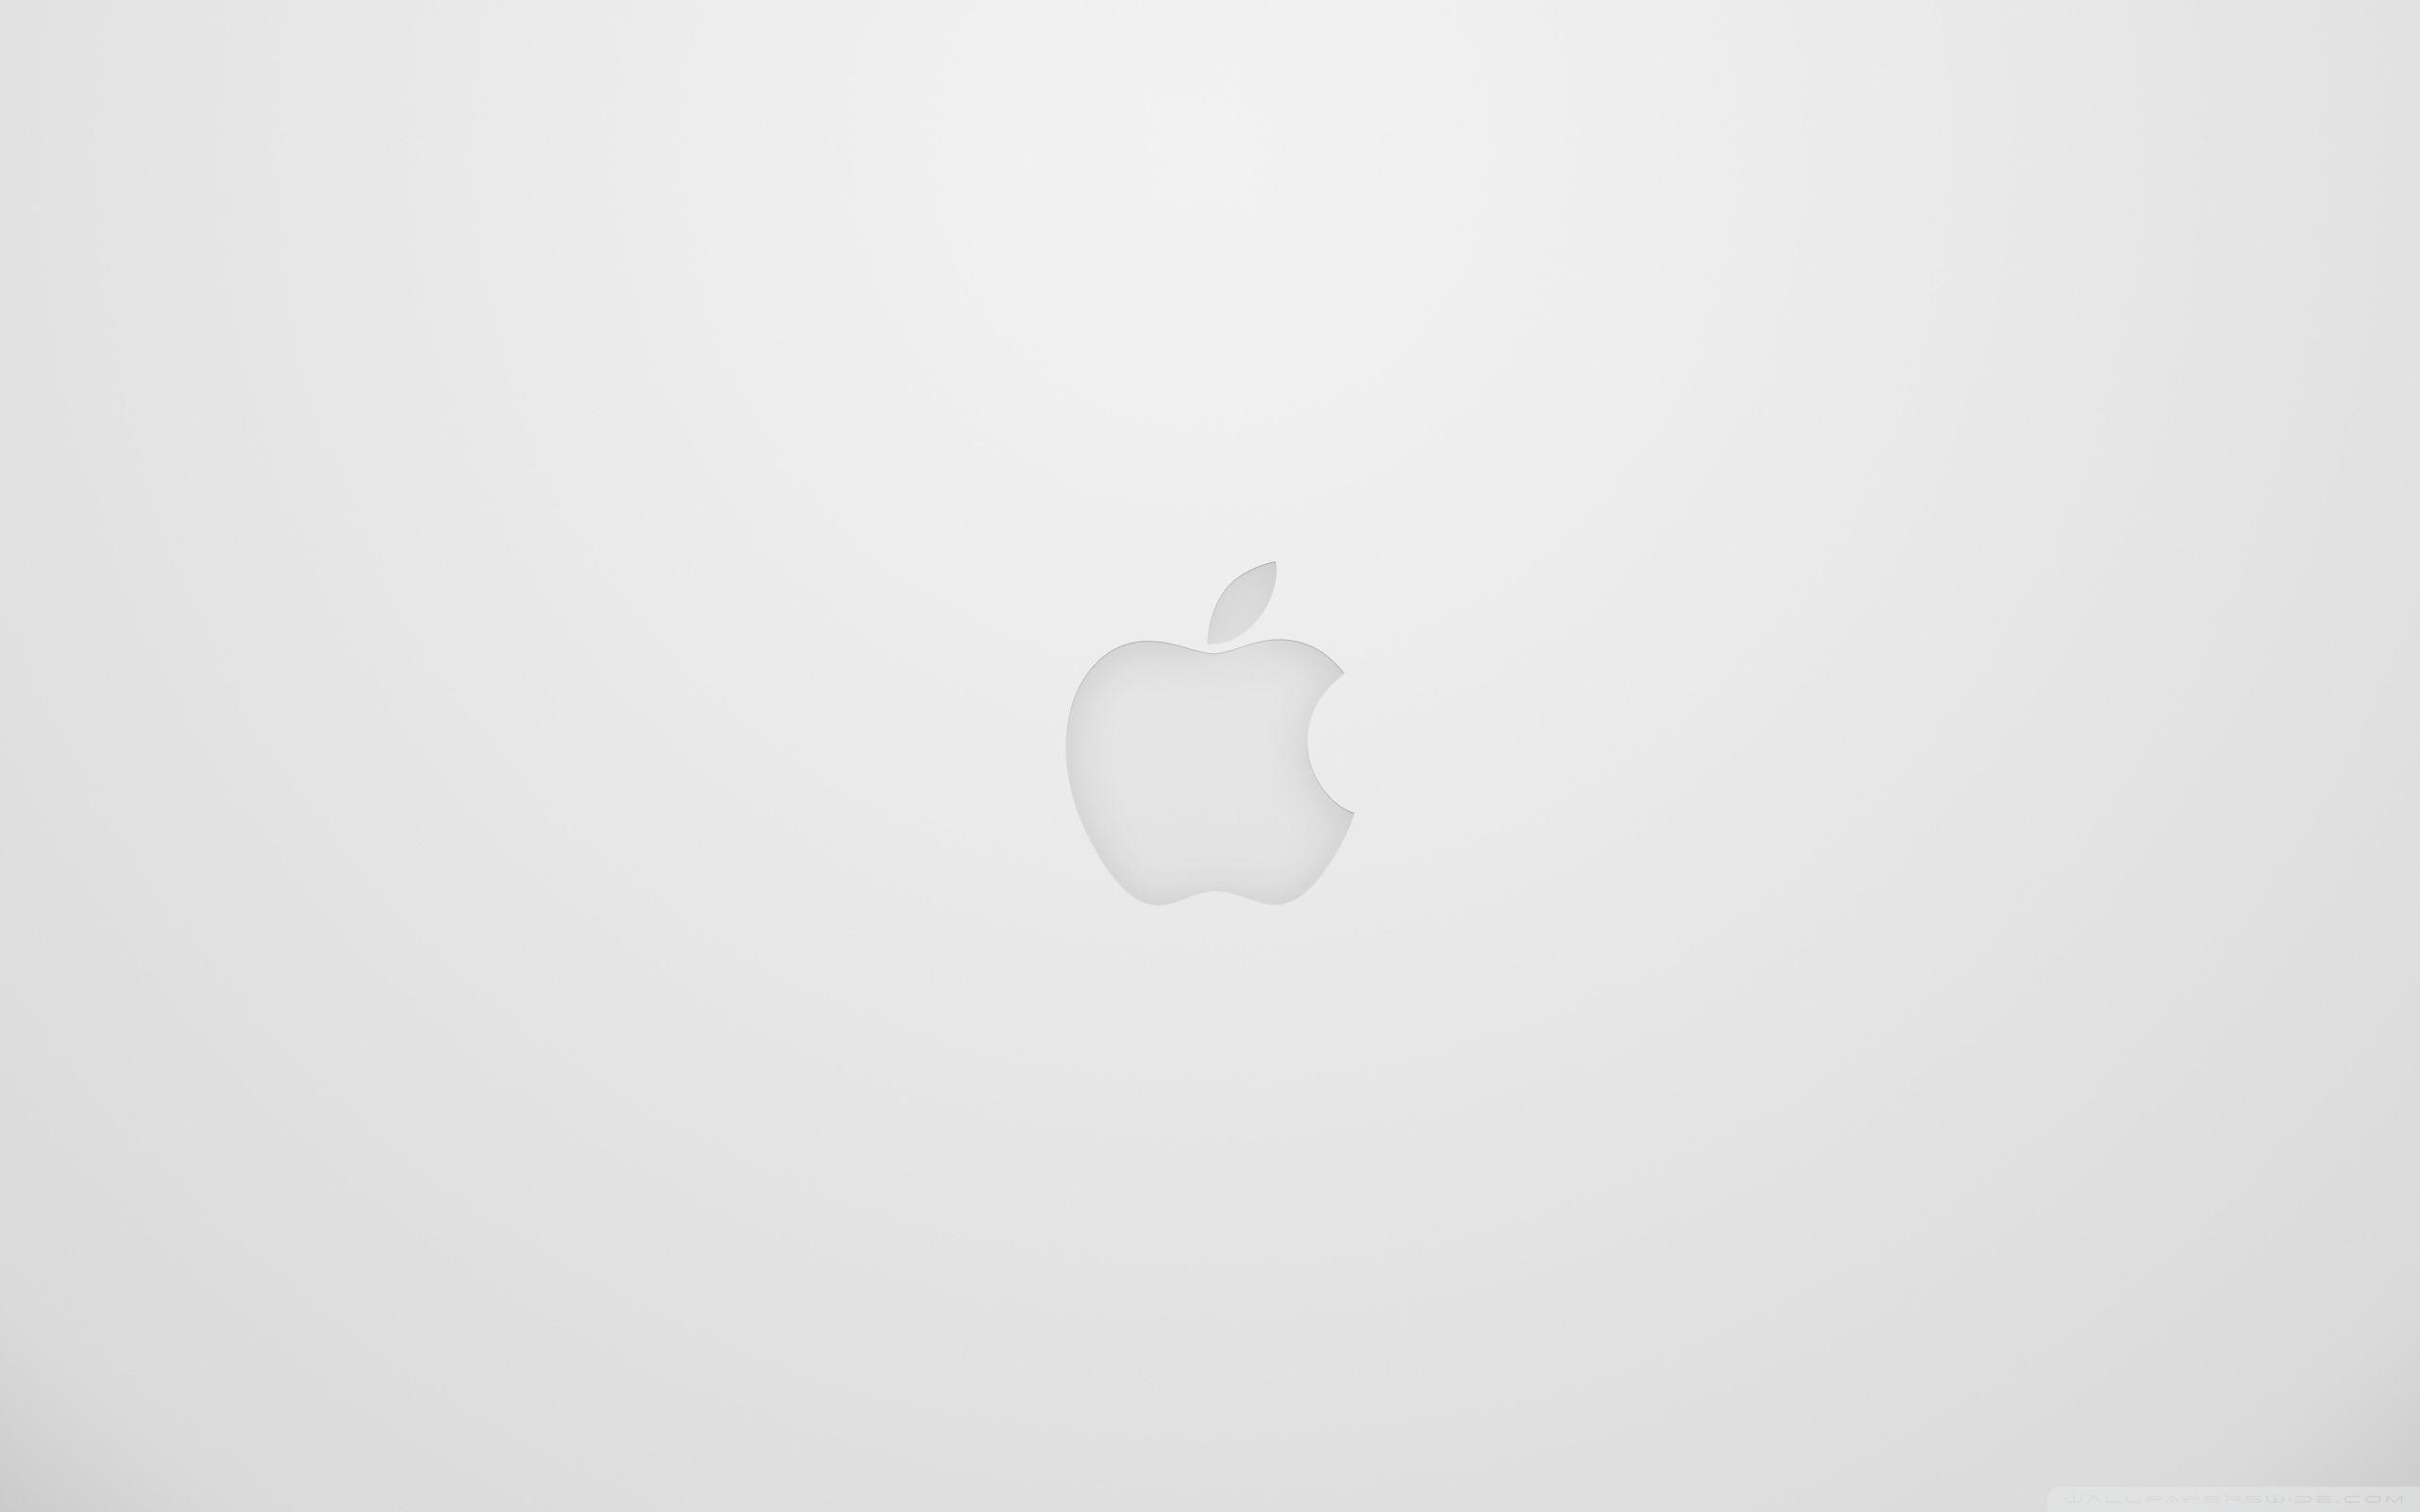 Apple White Wallpaper. Android